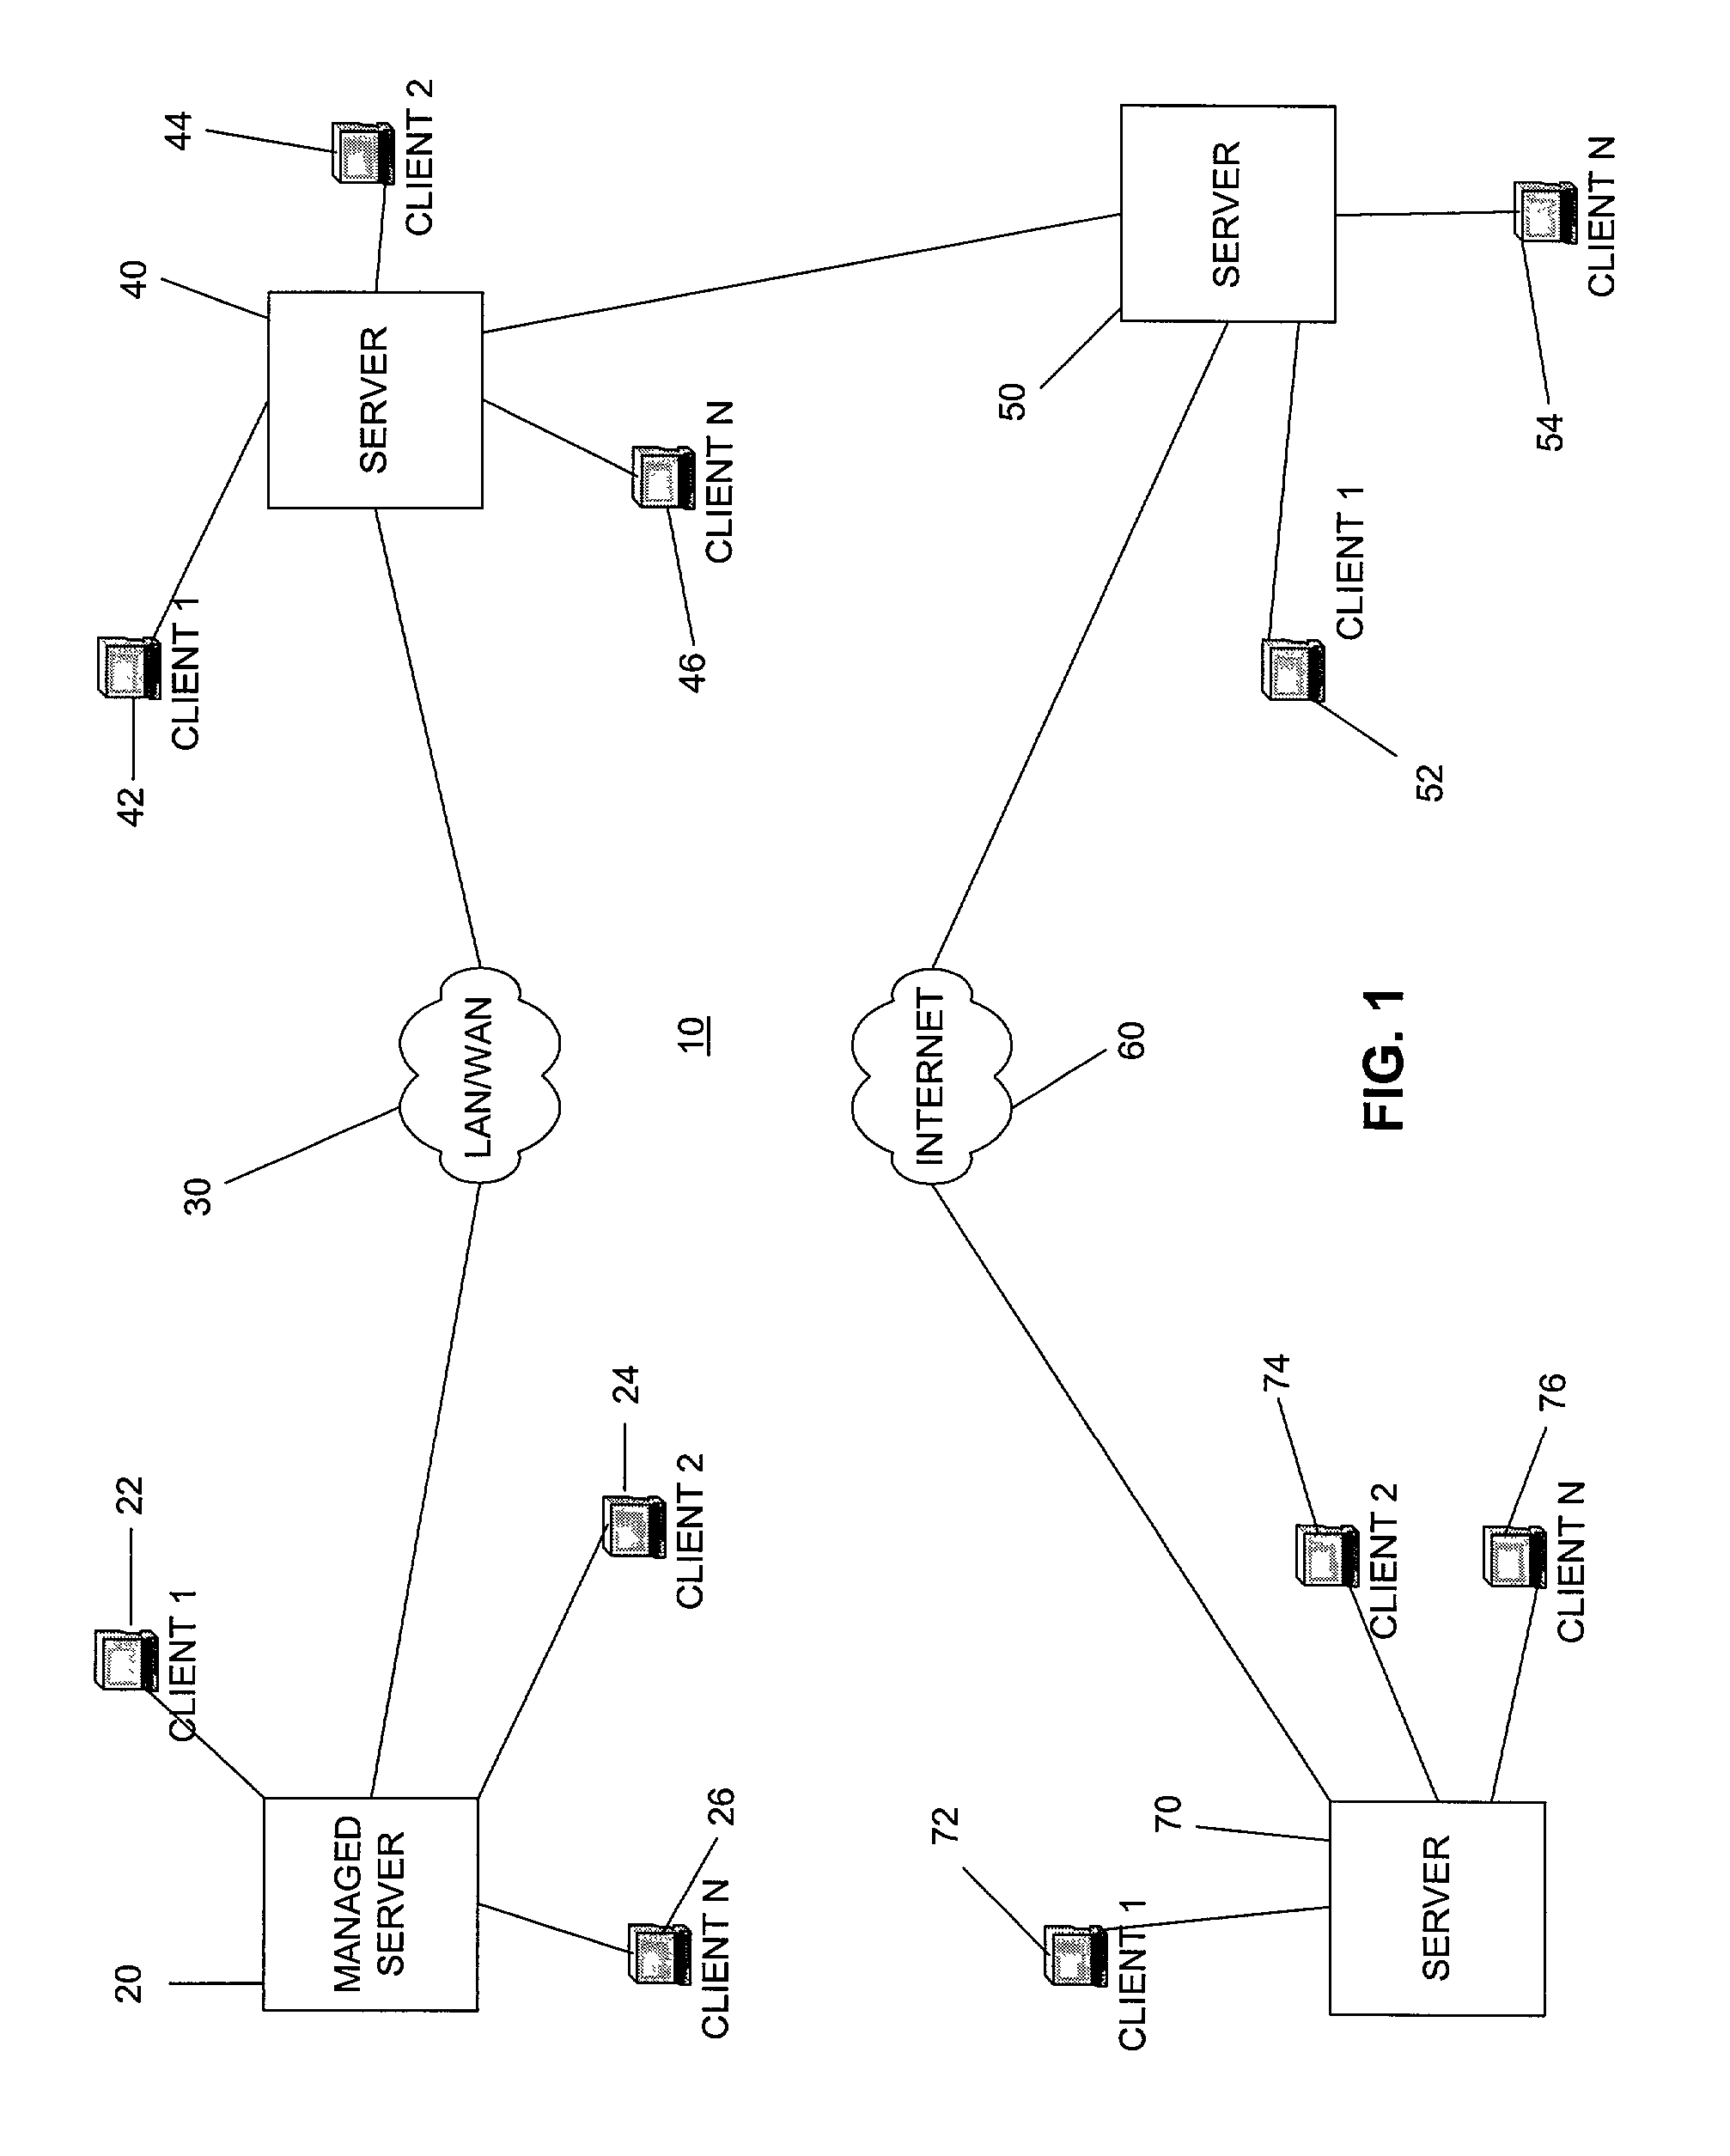 Method and apparatus to provide sound on a remote console